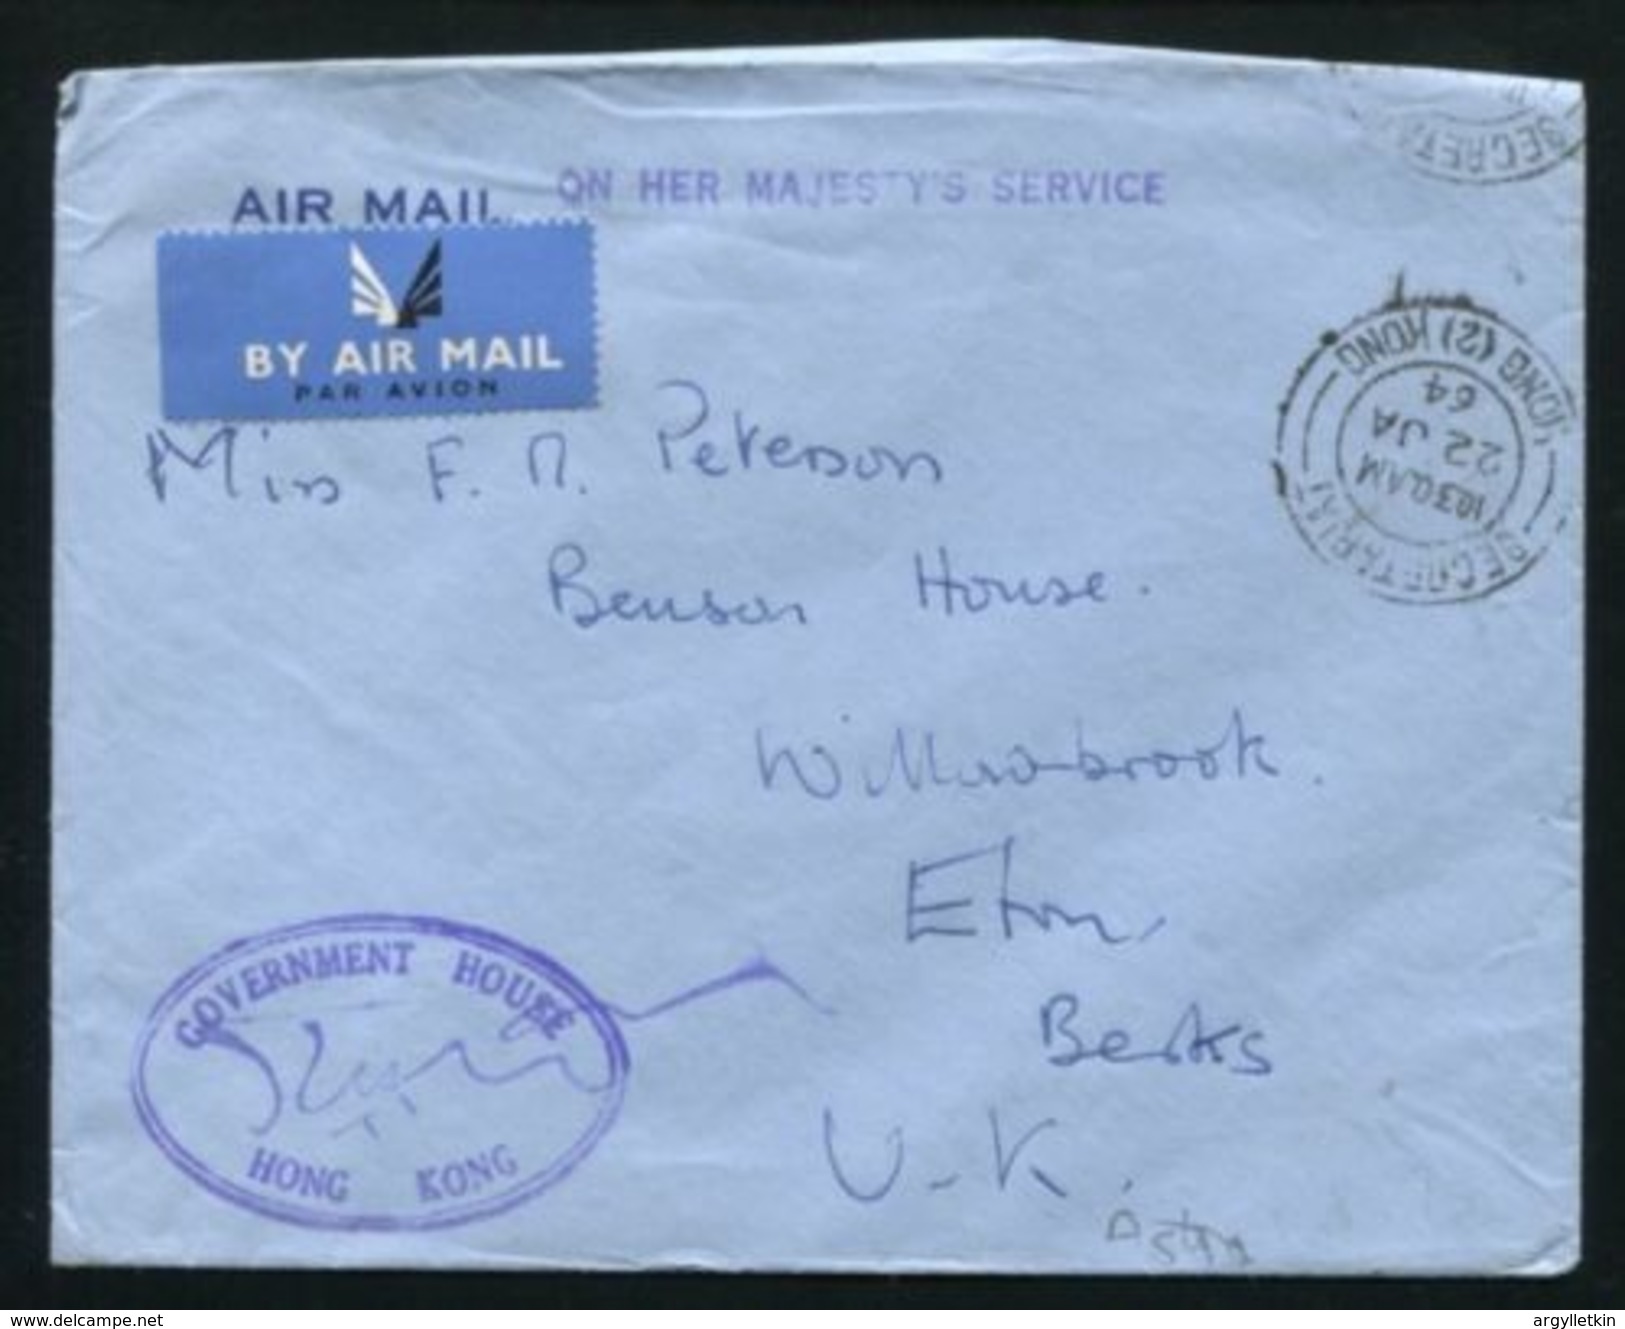 HONG KONG OHMS GOVERNMENT HOUSE ON ASTRA AIRMAIL ENVELOPE 1964 - Storia Postale